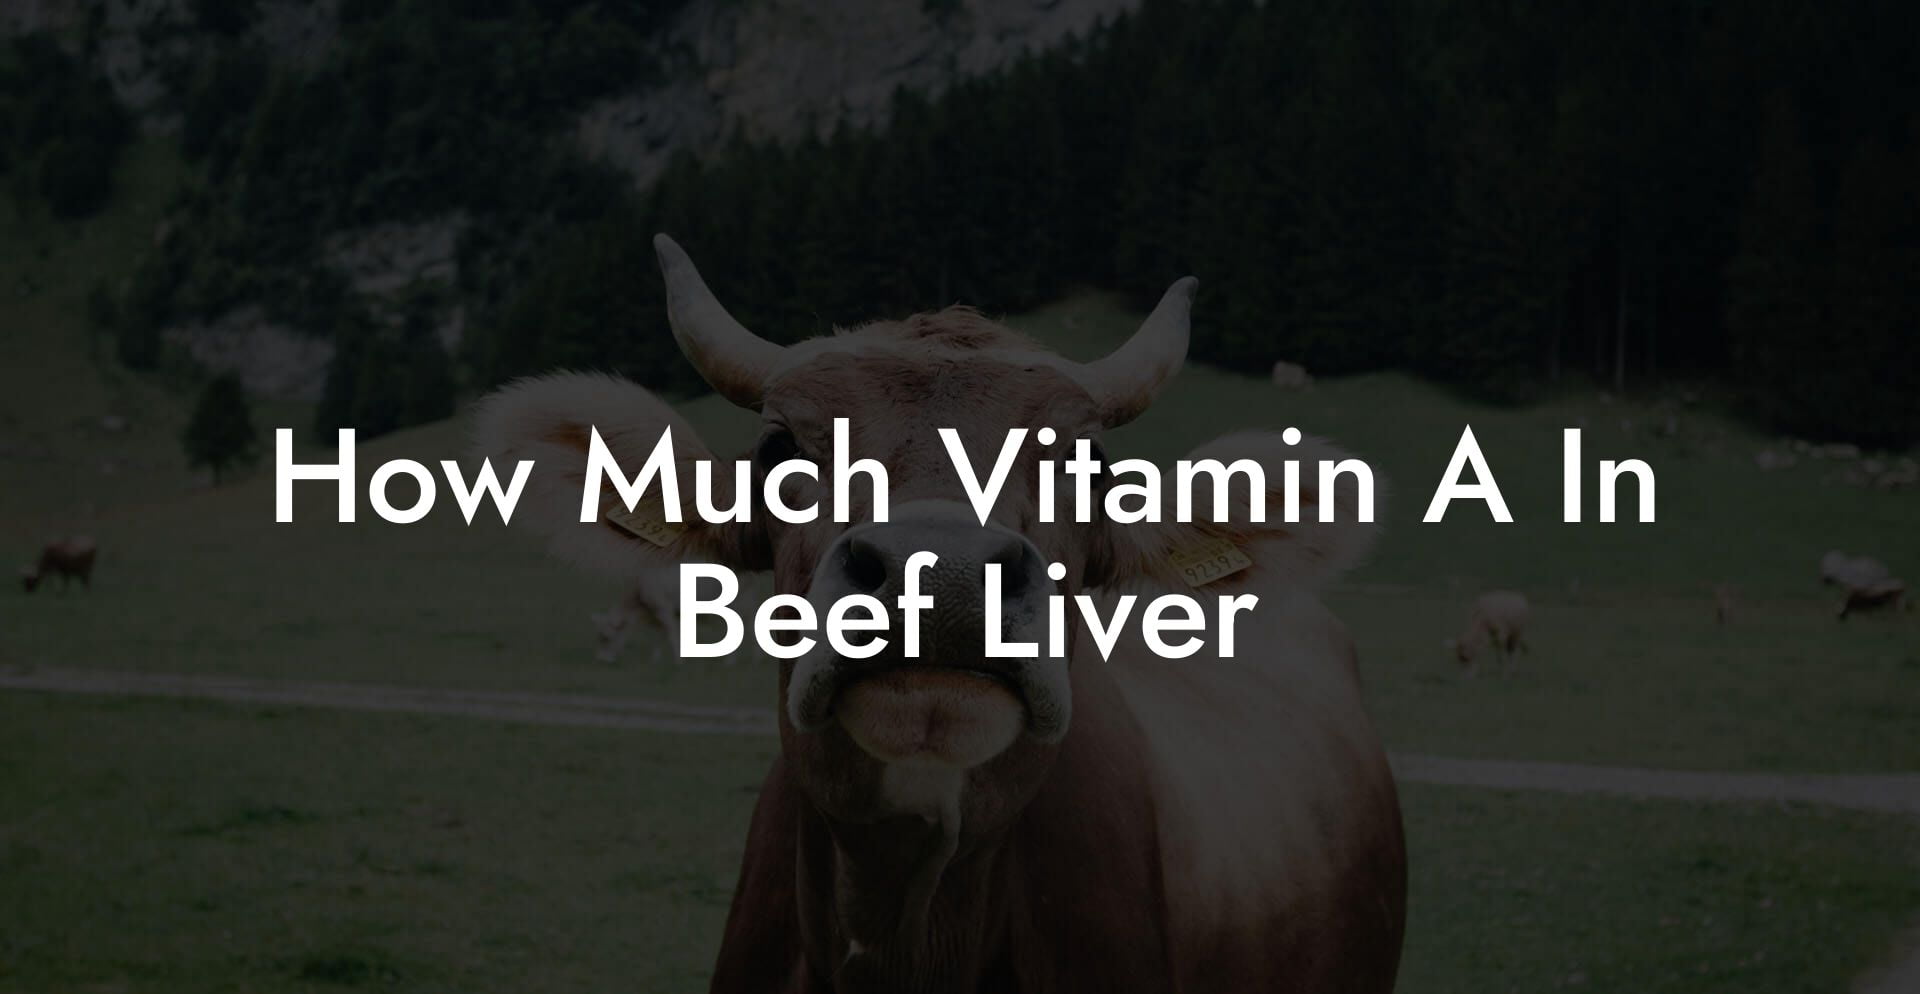 How Much Vitamin A In Beef Liver